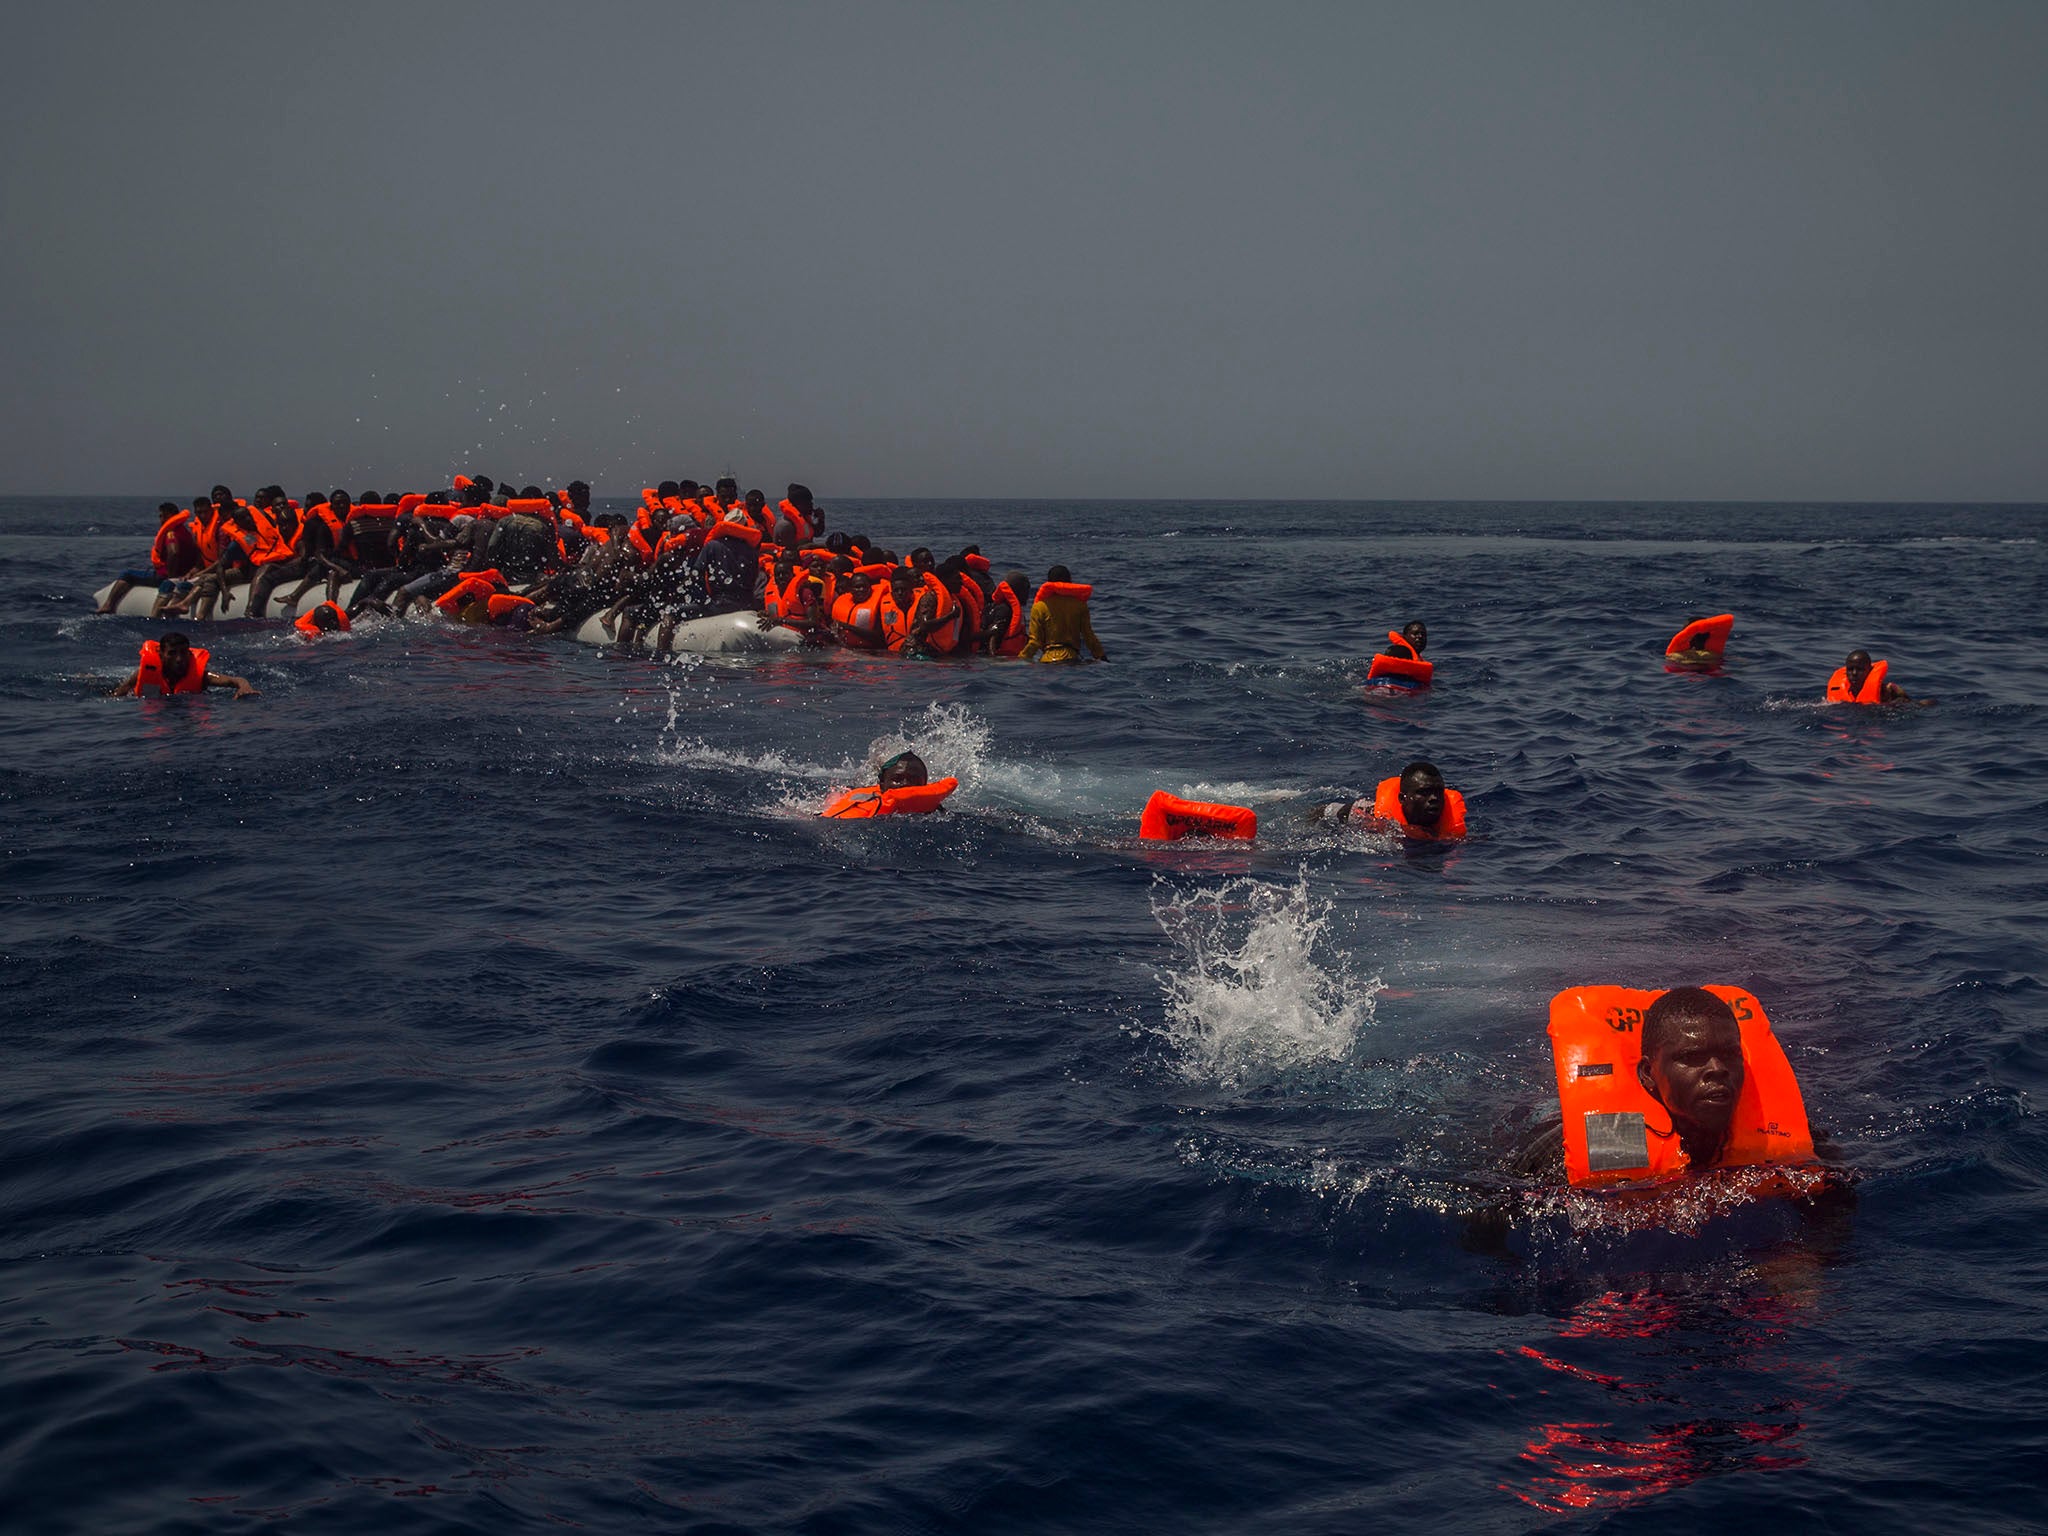 Miigrants try to reach a rescue boat from the Spanish aid organisation Proactive Open Arms after falling from a punctured rubber boat in the Mediterranean about 12 miles north of Sabratha, Libya